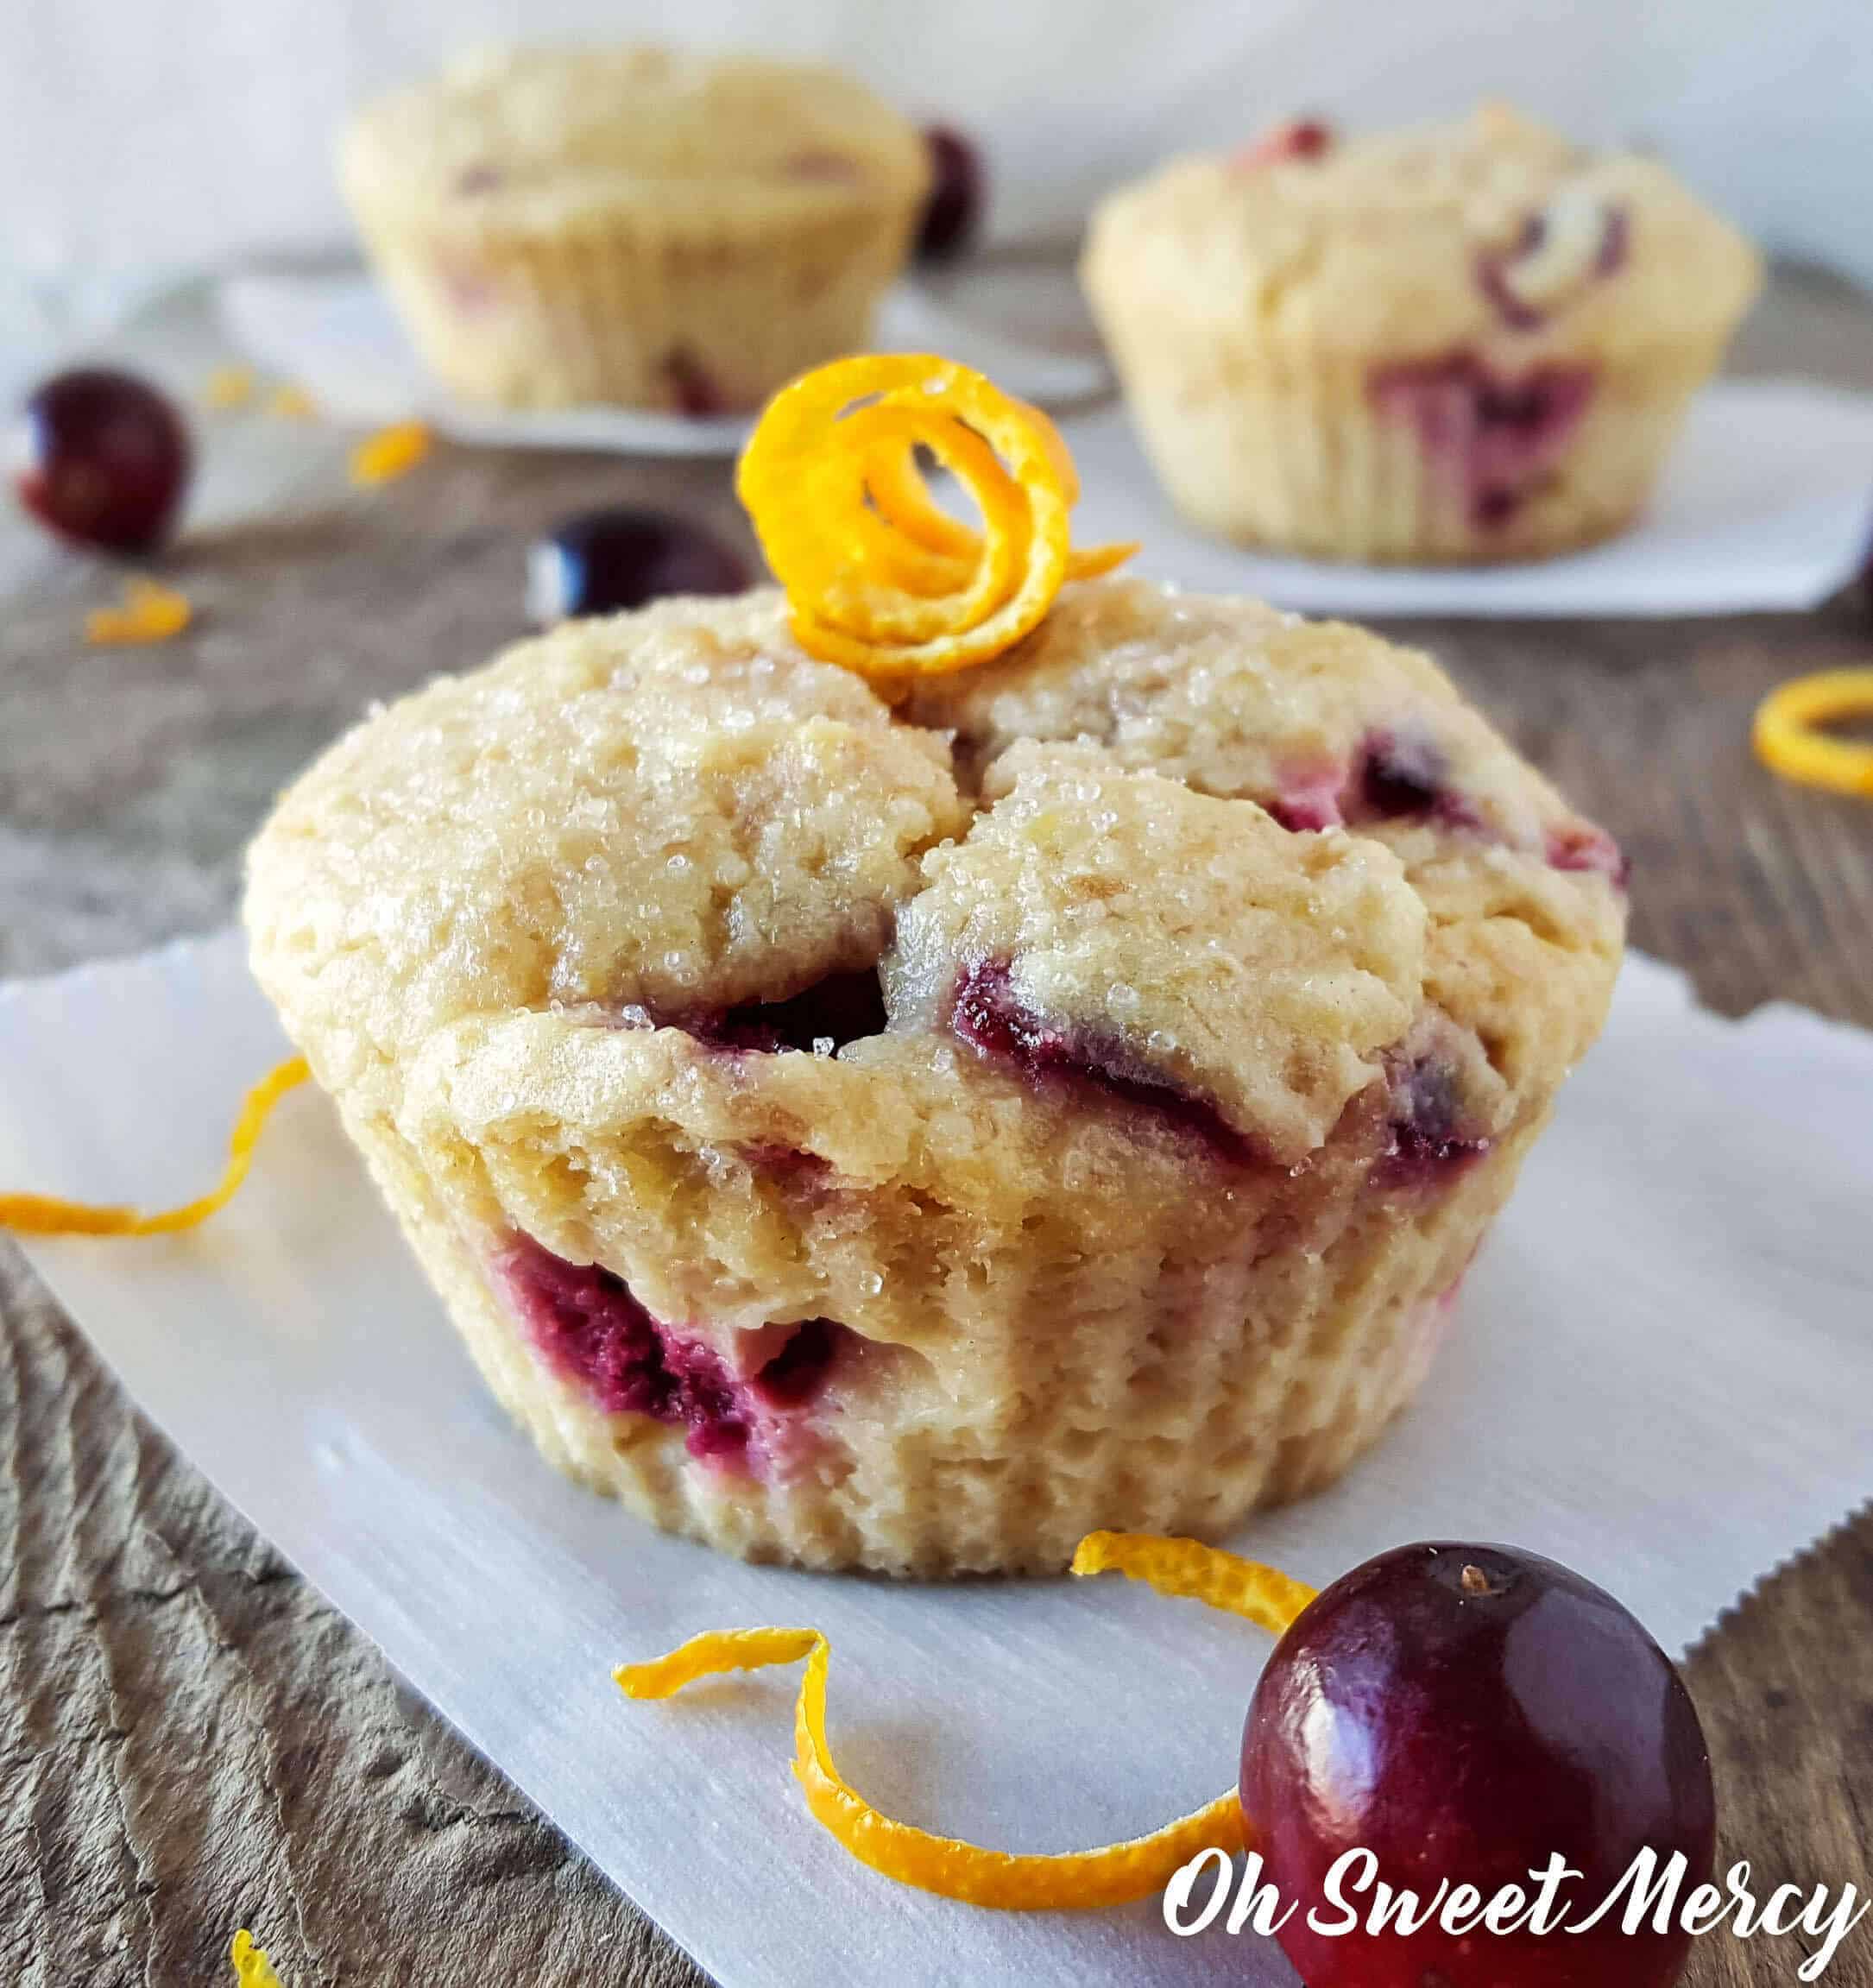 These sweet-tart Cranberry Orange Baobab Muffins are low carb, gluten and sugar free! Perfect for Trim Healthy Mamas! #lowcarb #sugarfree #glutenfree #baobab #healthy #recipes